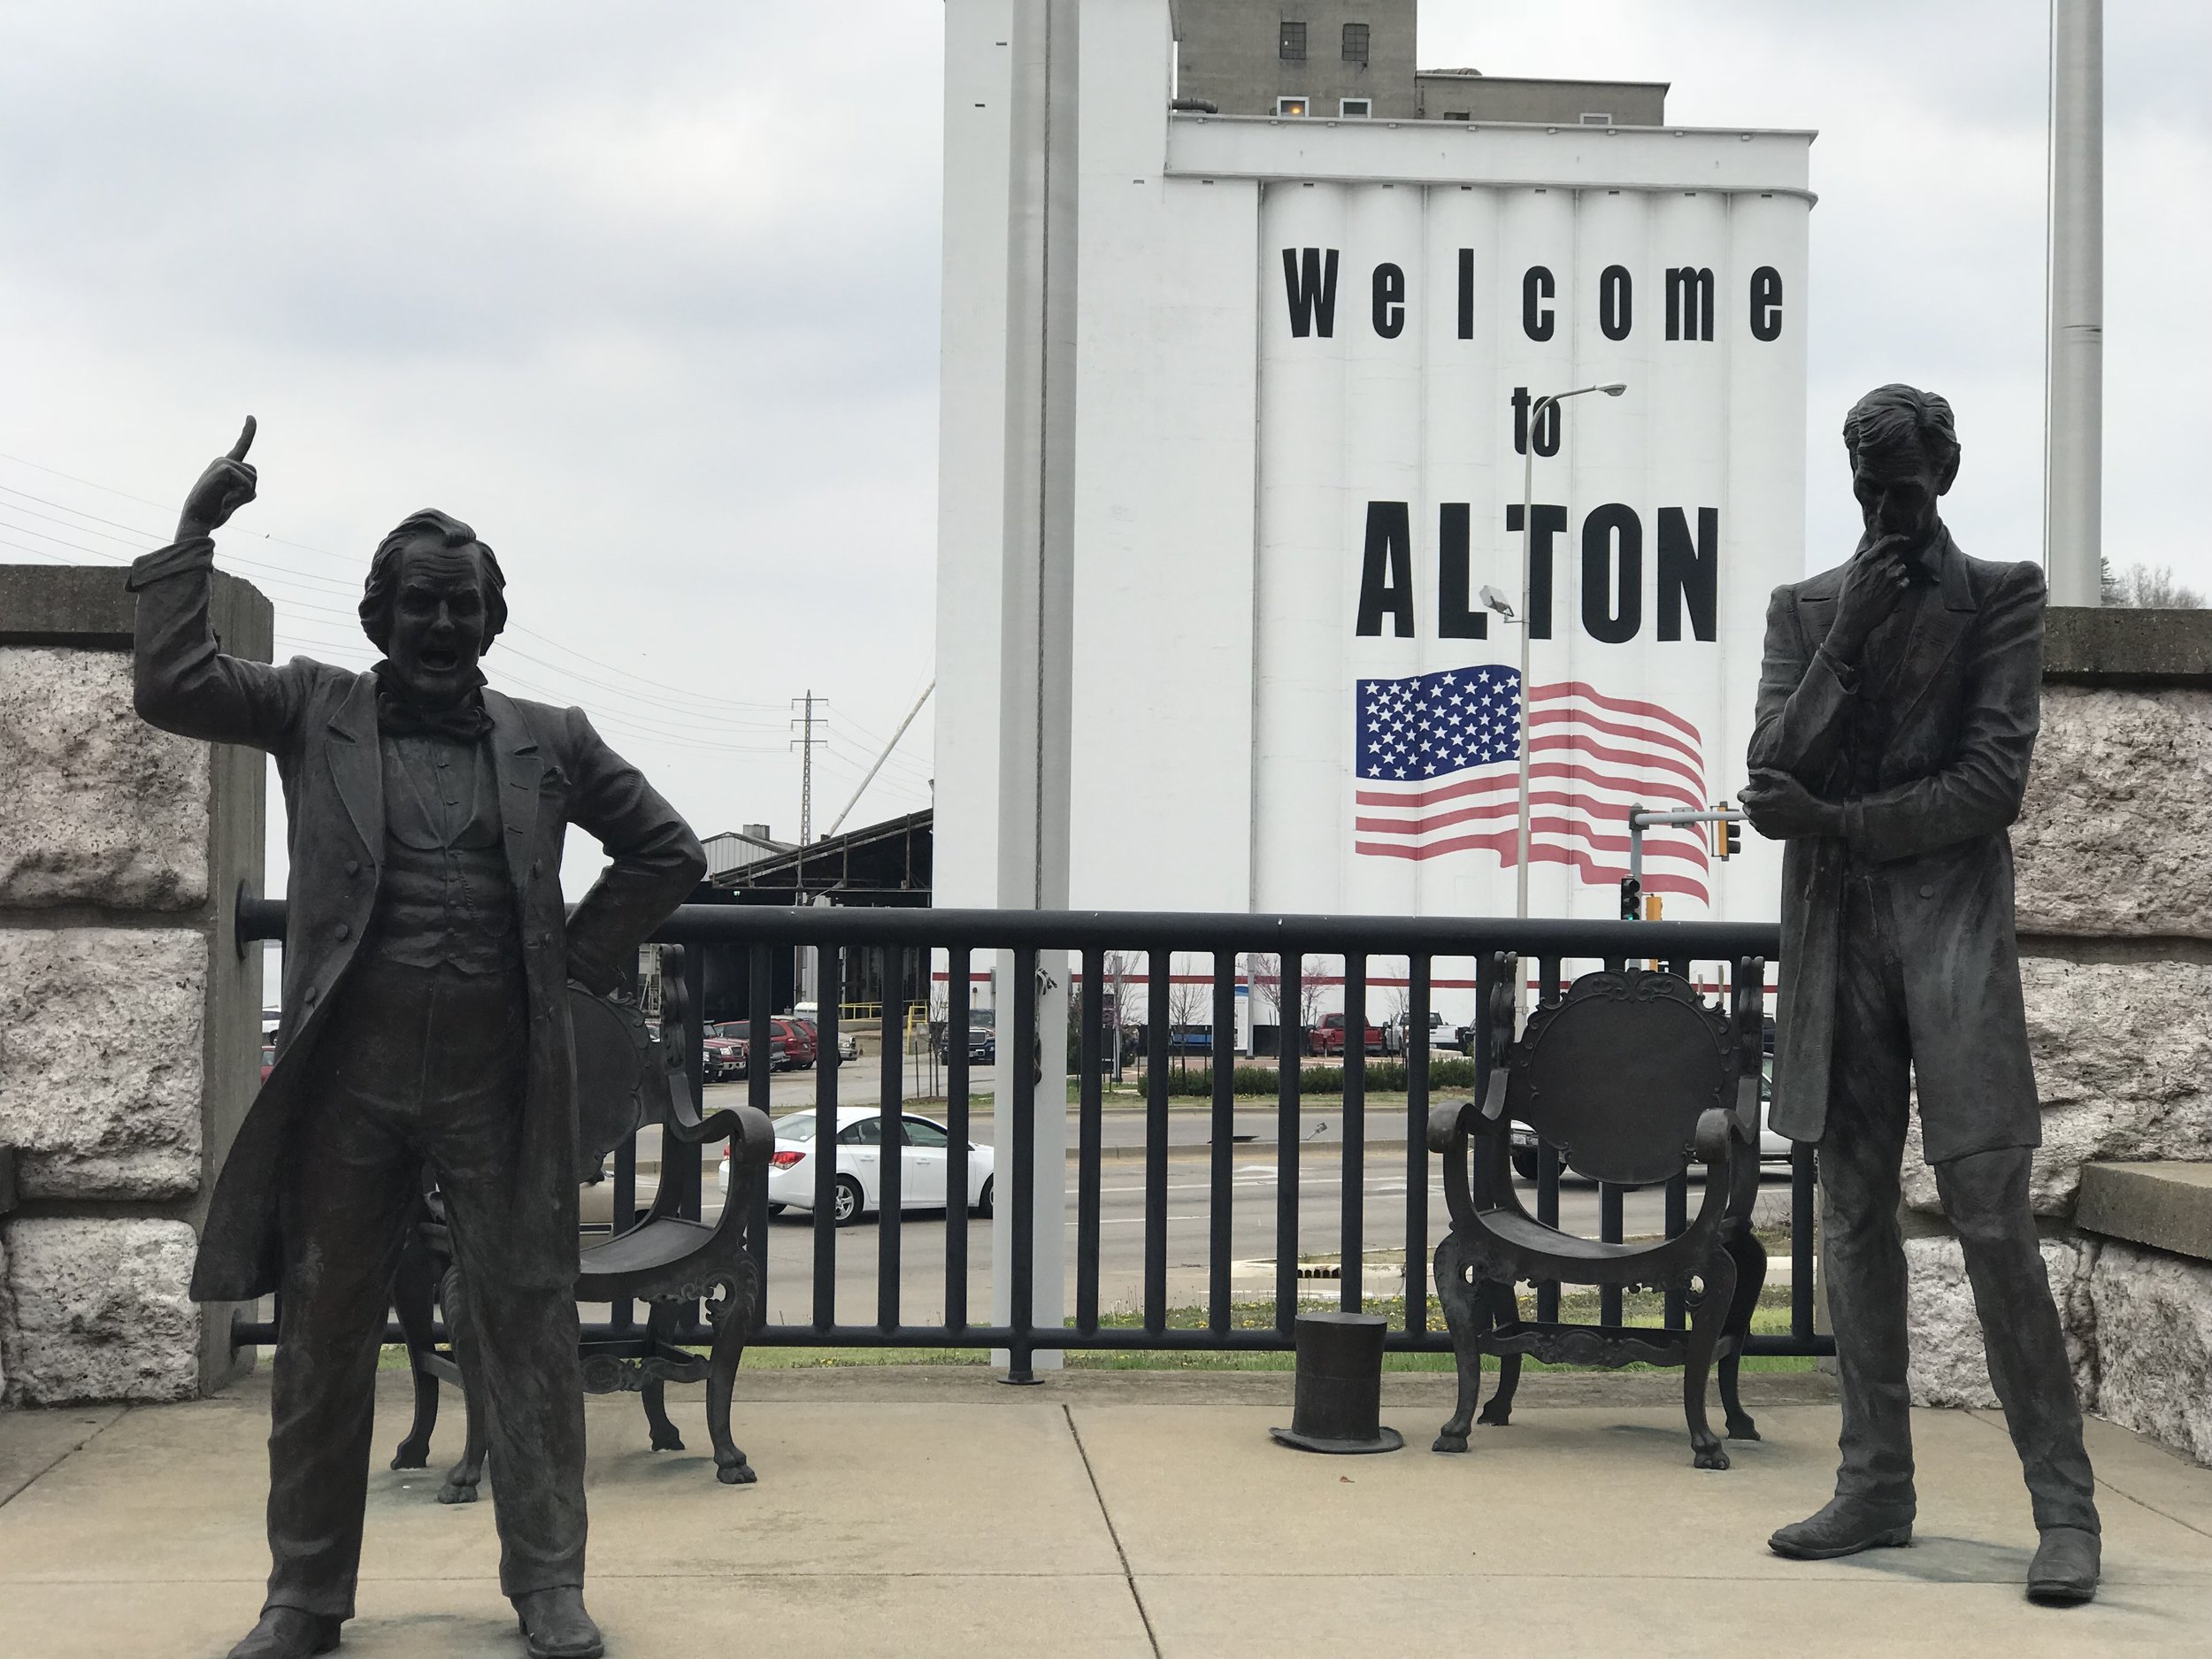  Statues at the site of the last of the 1858 debates between Stephen Douglas and Abraham Lincoln in Alton, Ill. 